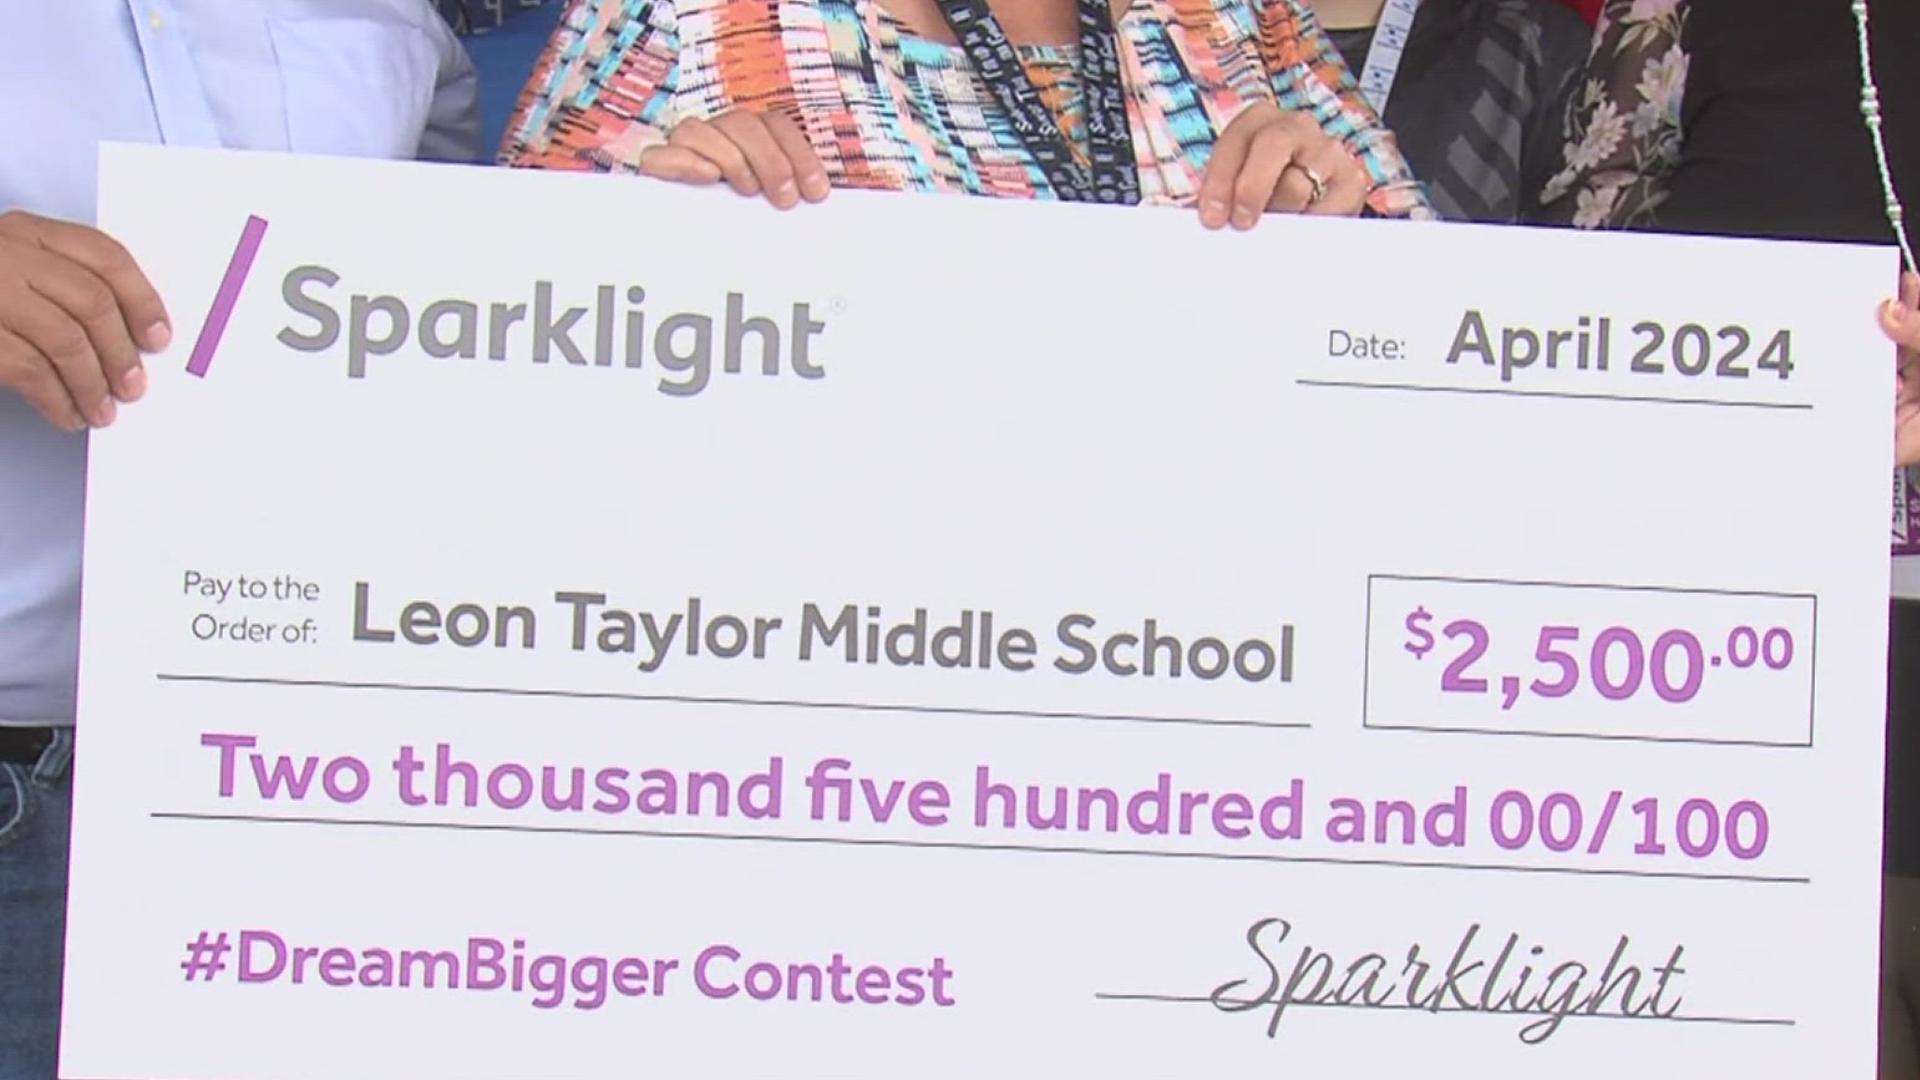 Suzanne Kilburn was awarded a check for $2,500 Sparklight's Dream Bigger contest for her success in STEM education.